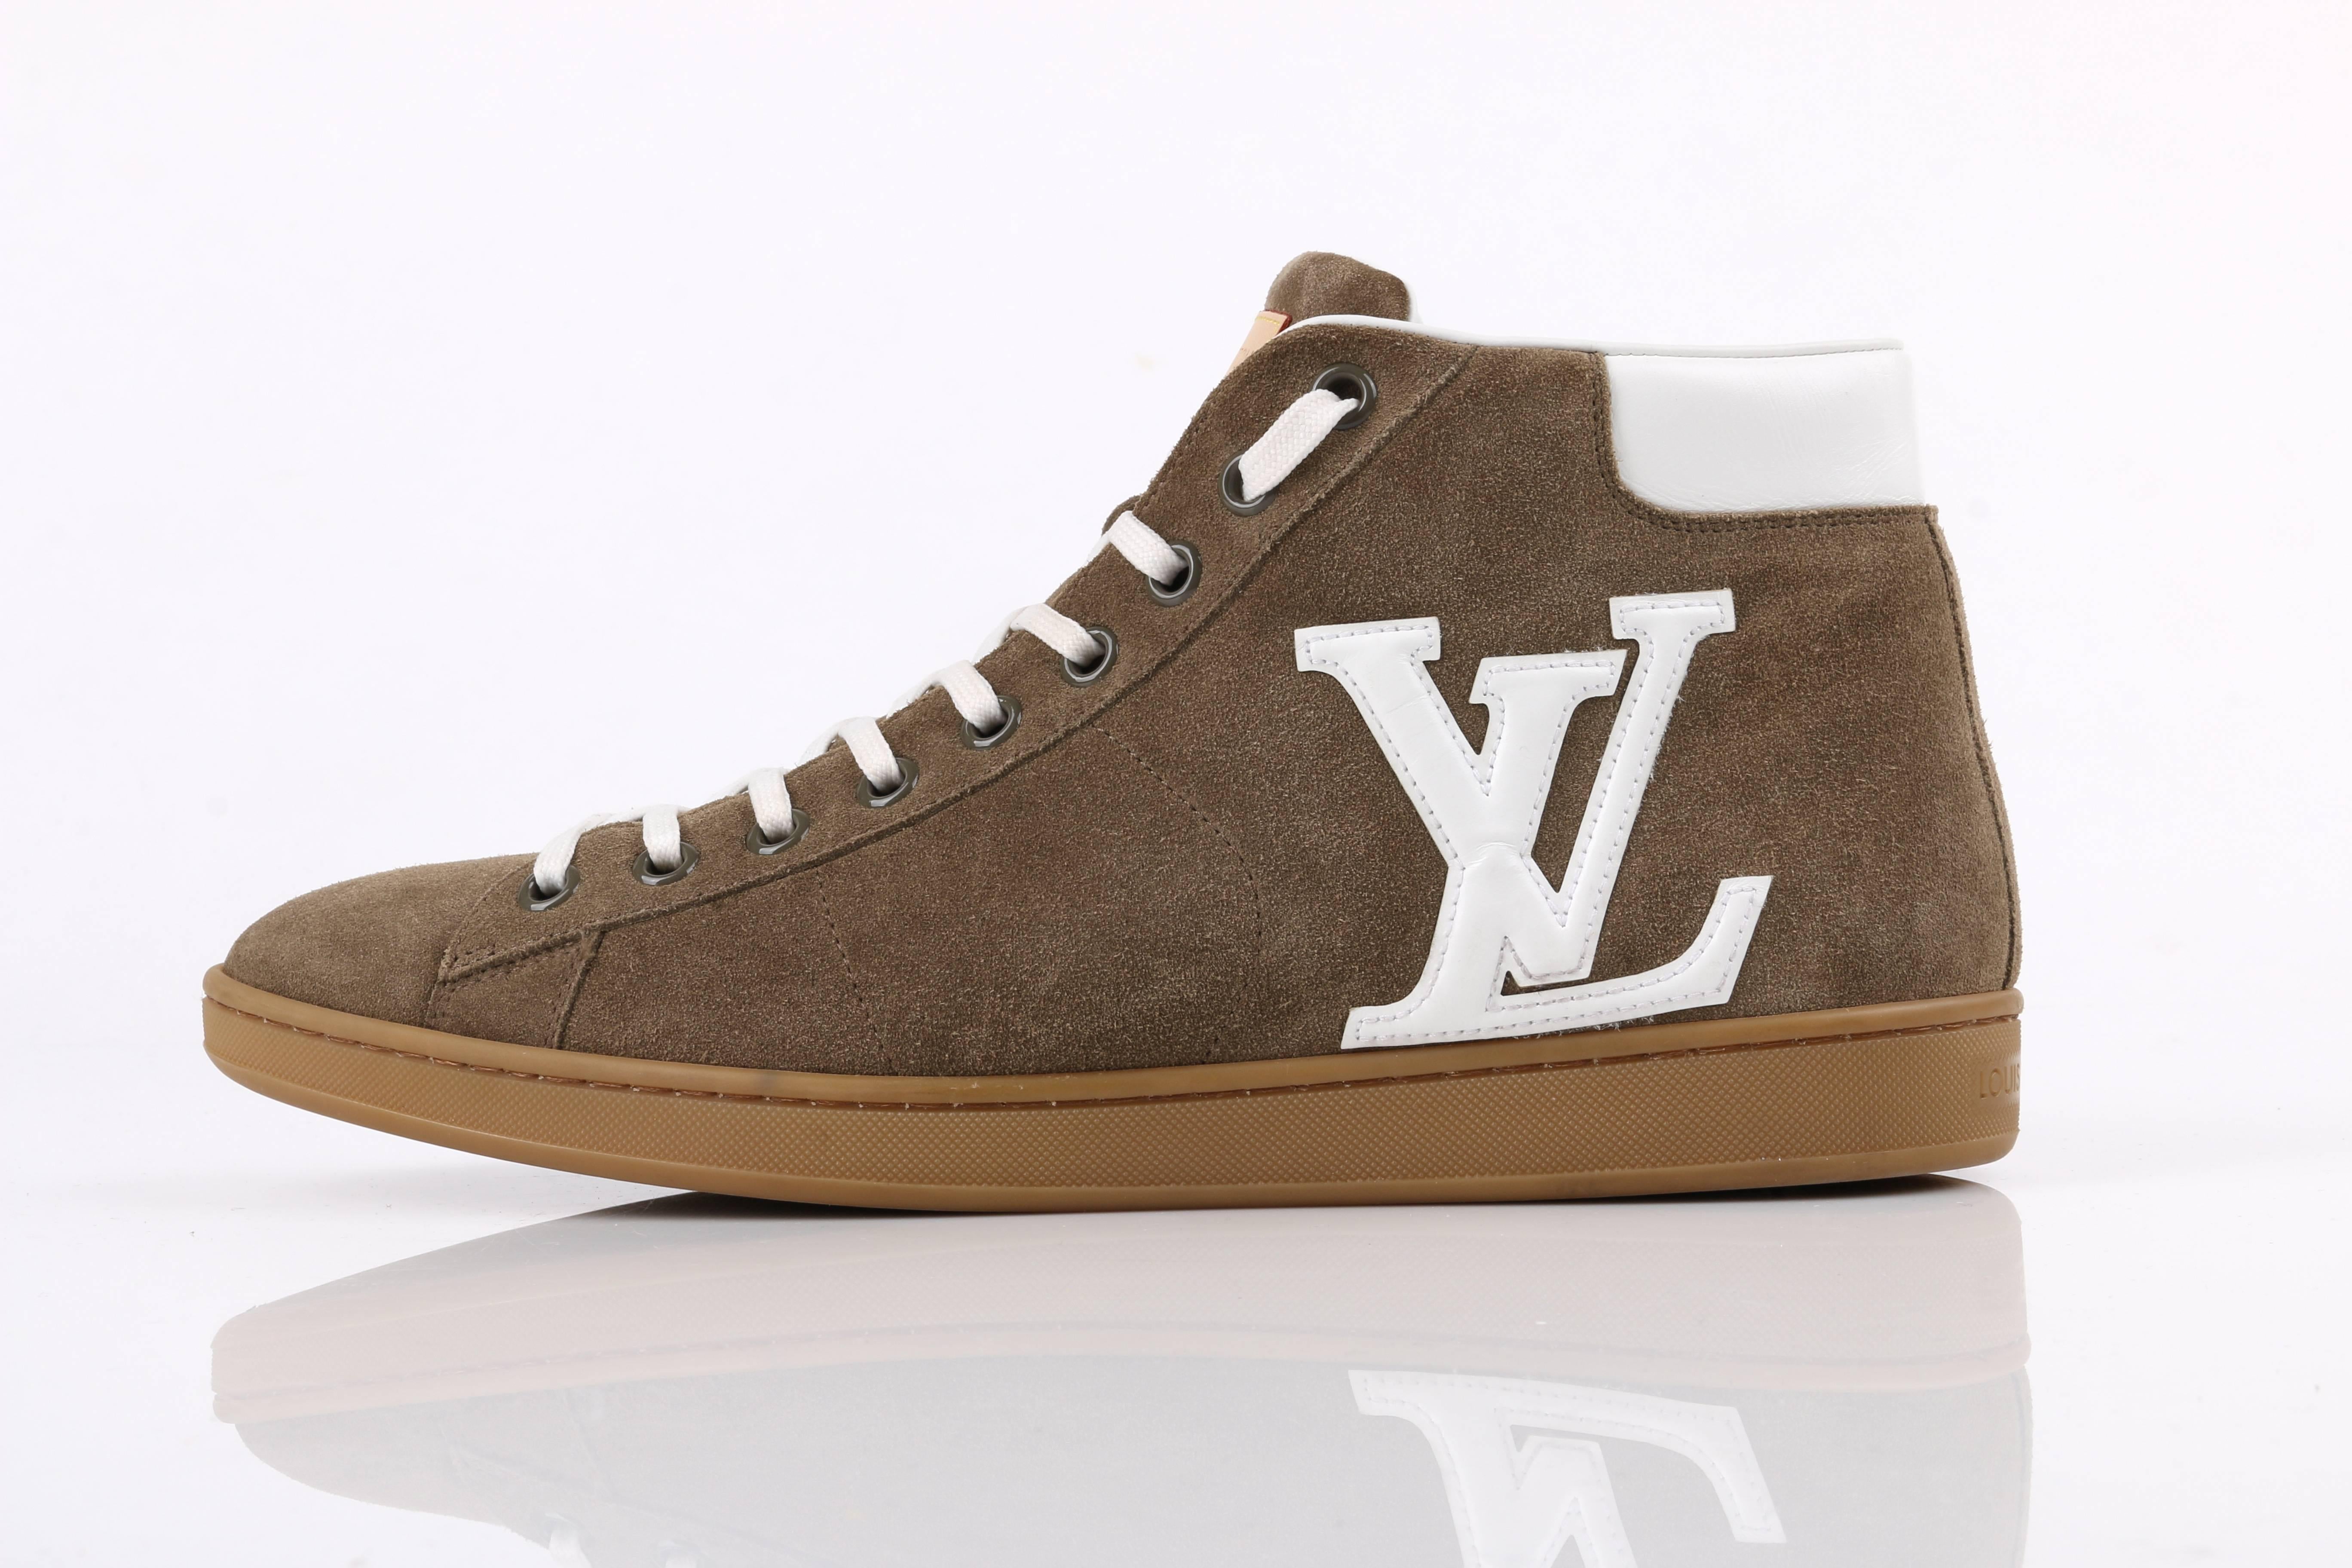 Brown LOUIS VUITTON S/S 2012 Khaki Suede Leather LV High Top 